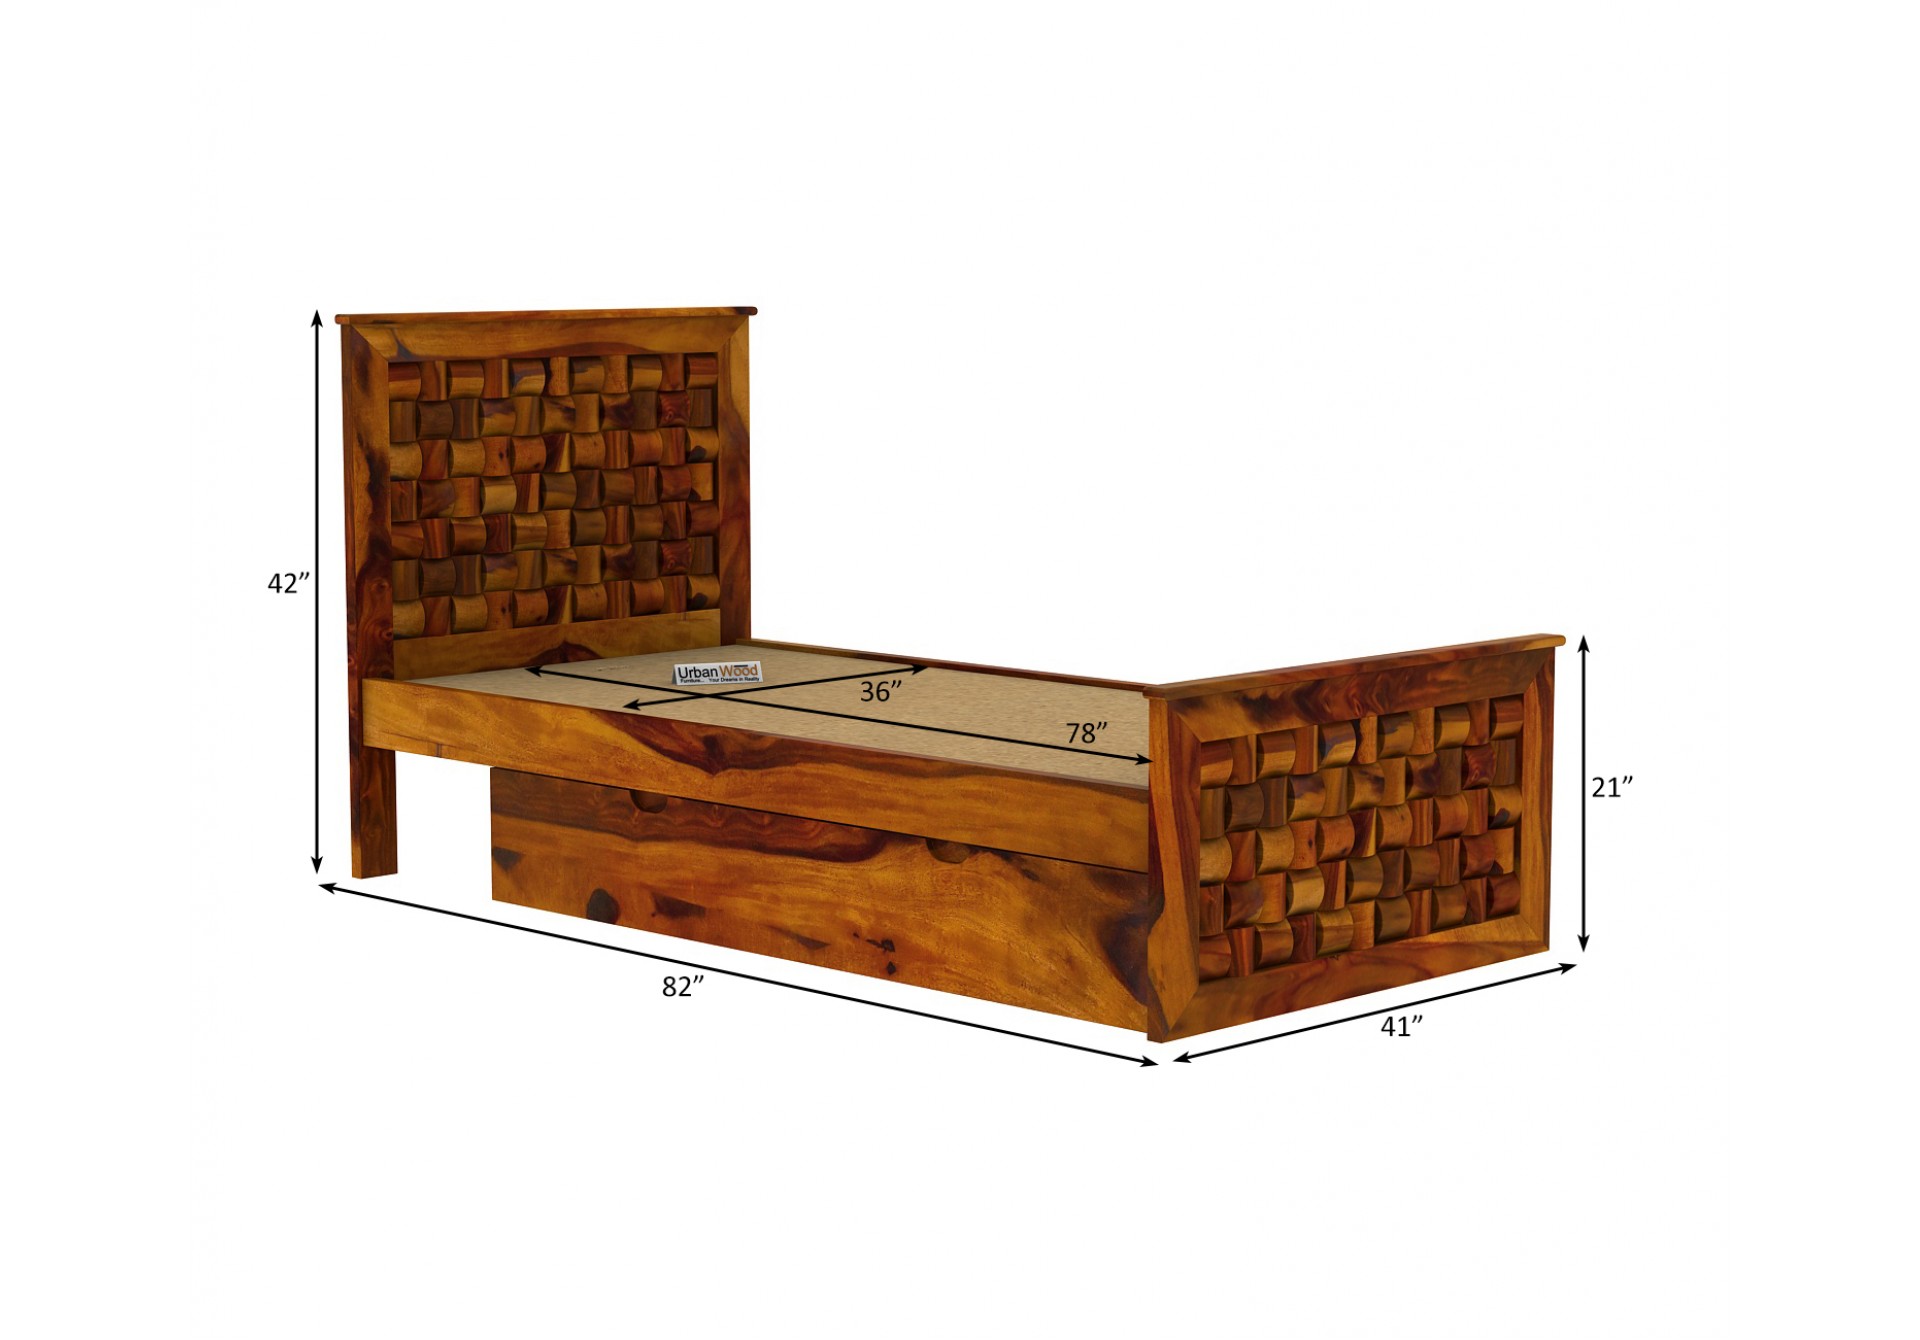 Hover Single Bed with Drawer Storage 